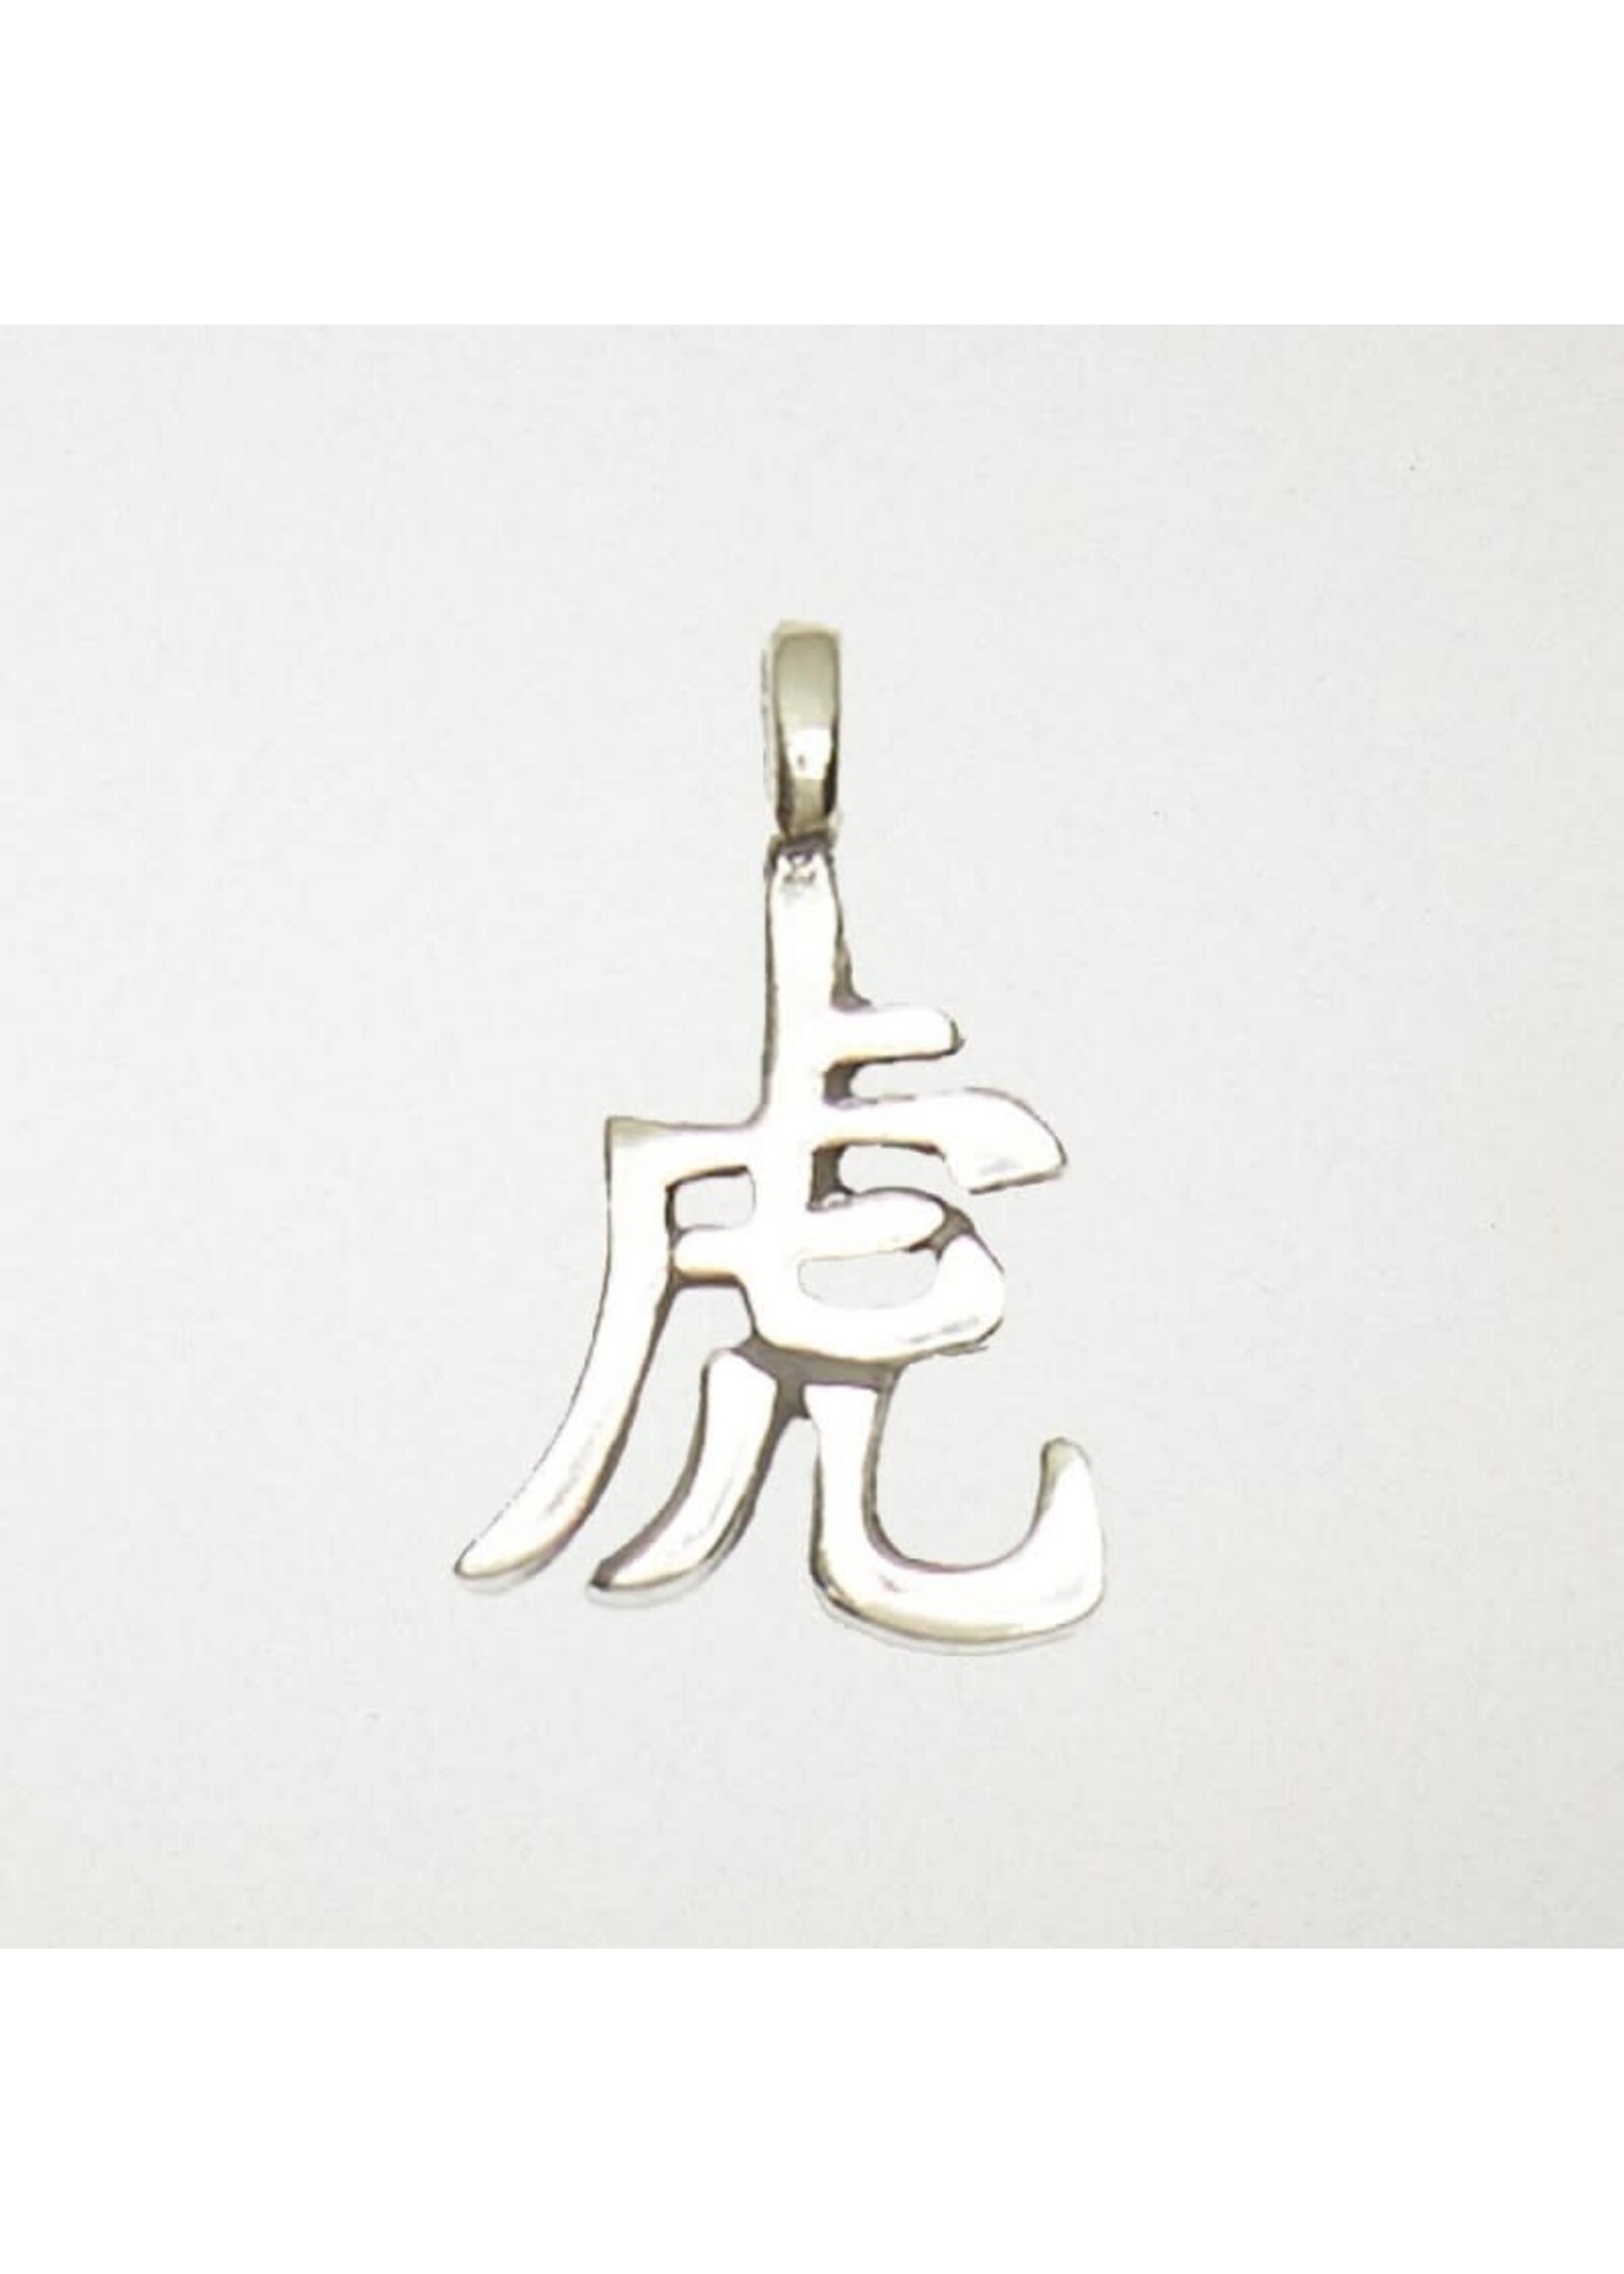 Chinese Astrology Pewter Pendant - Tiger